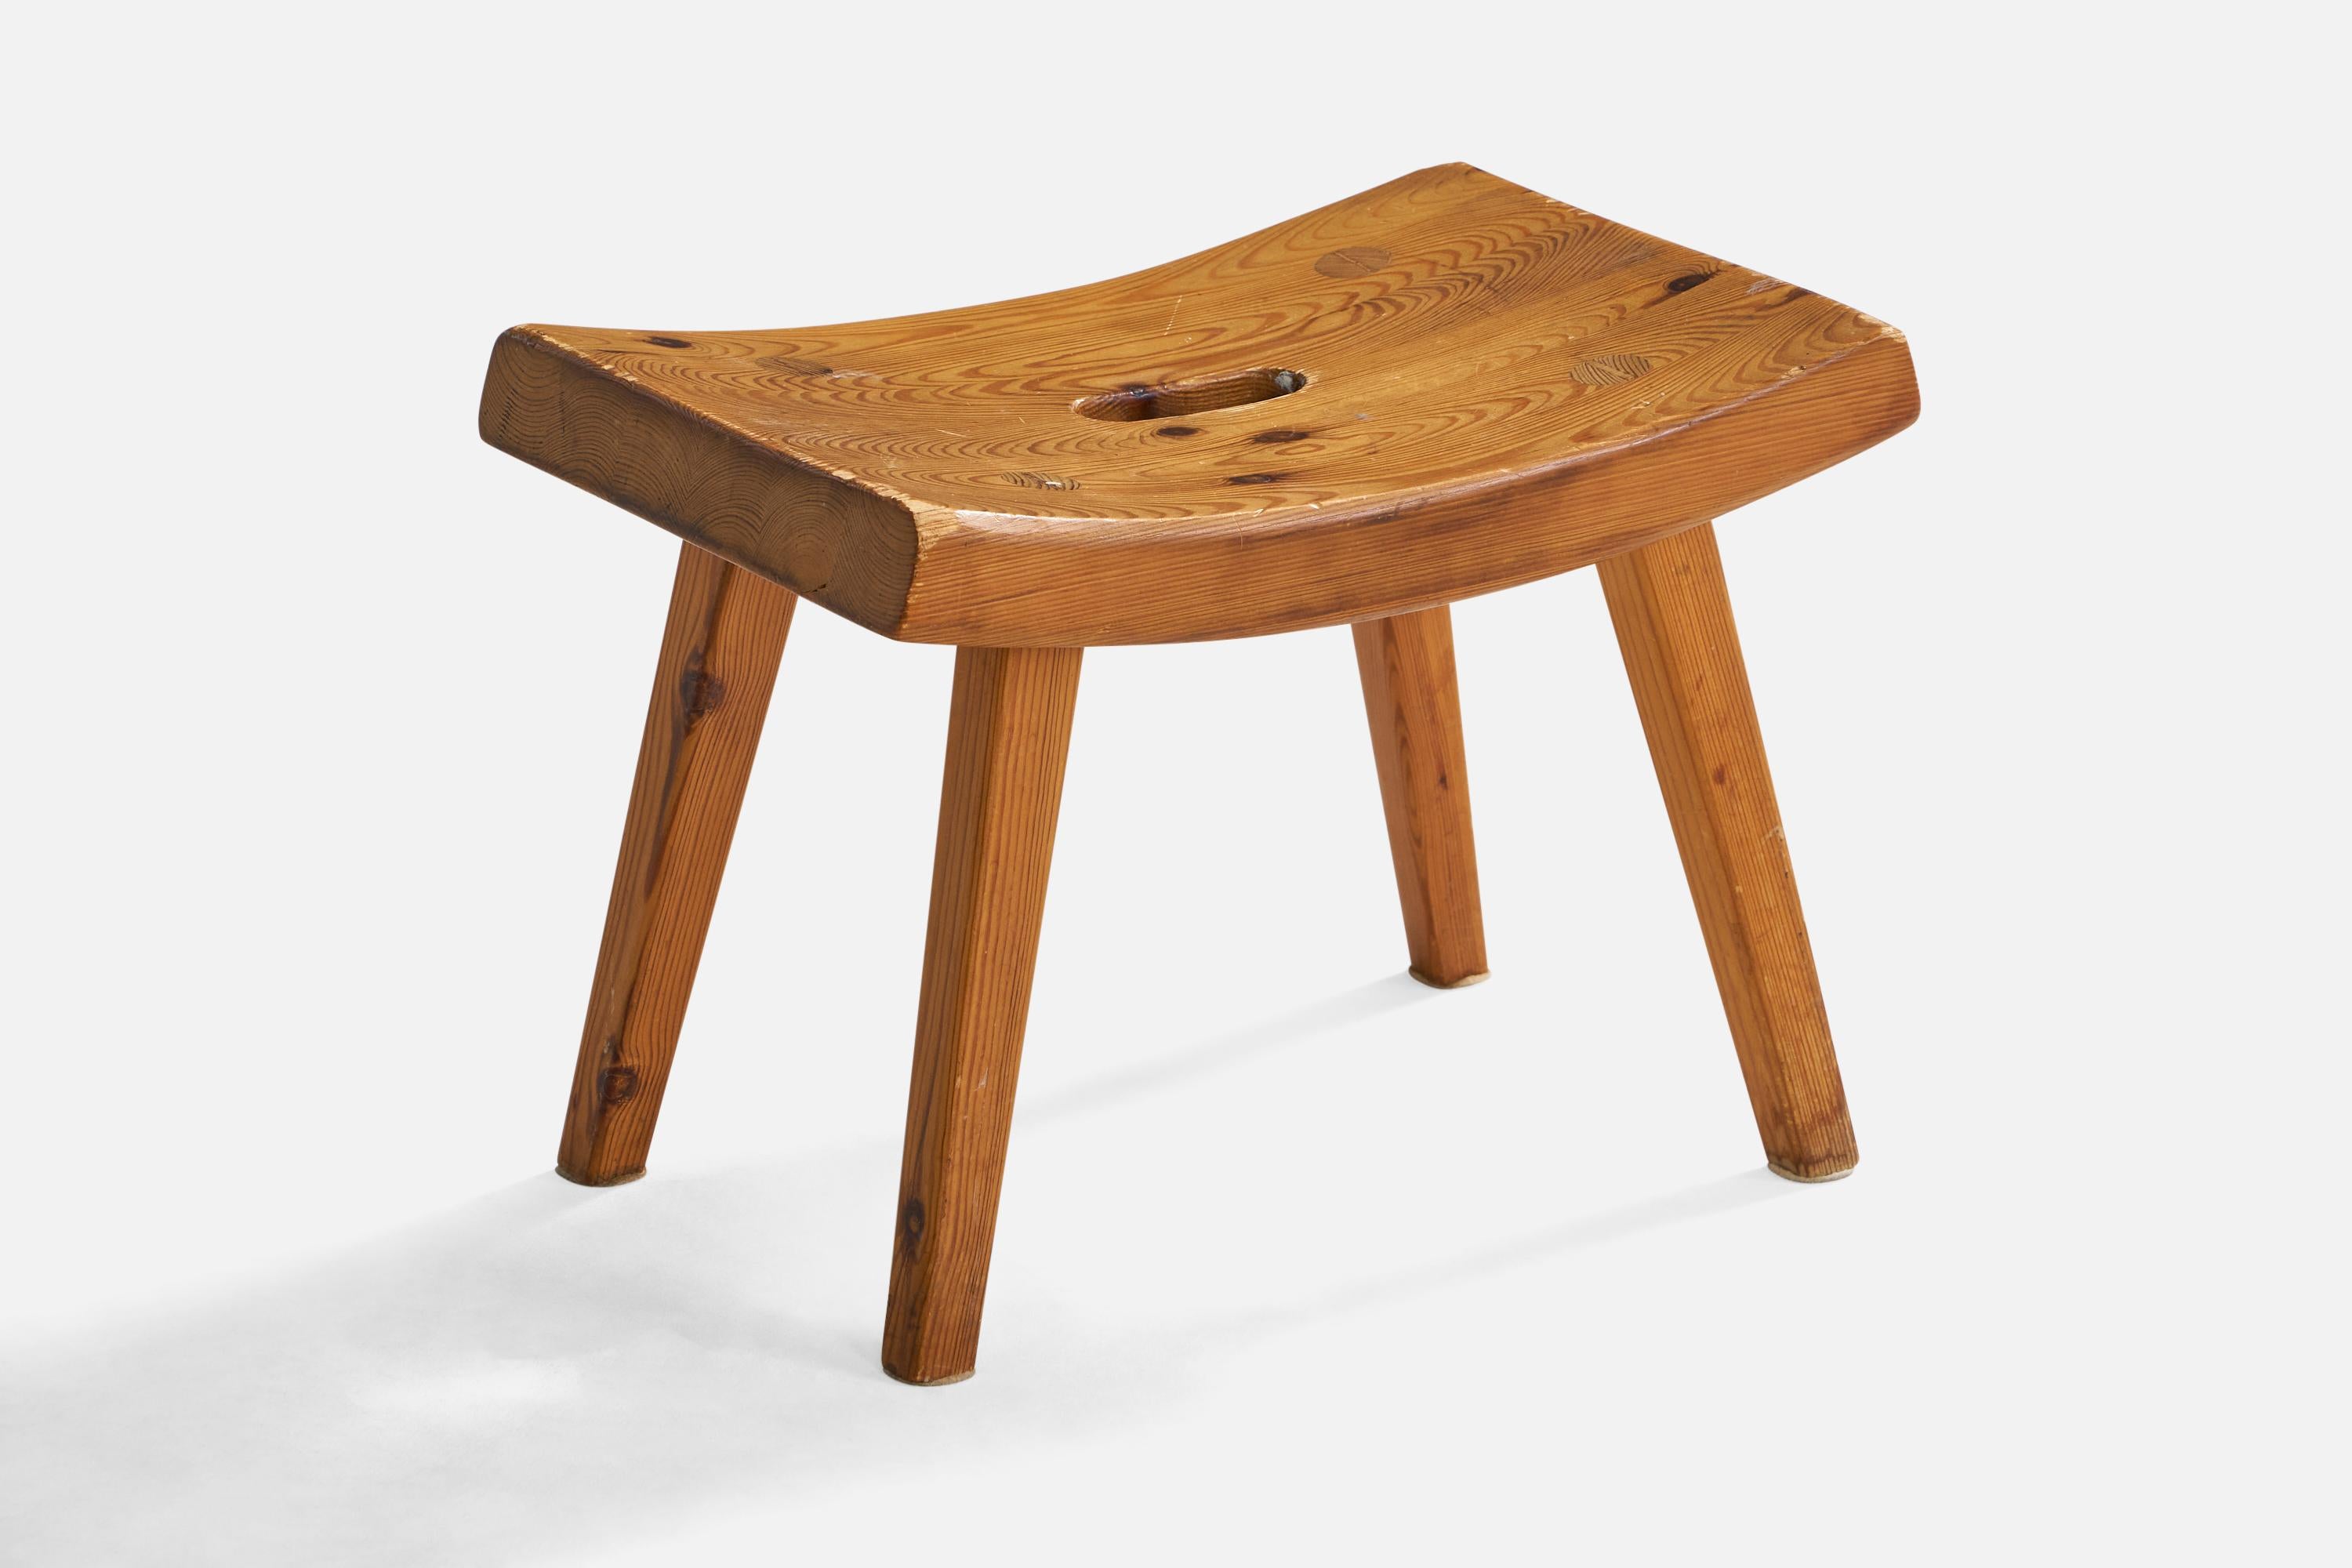 A small pine stool designed and produced in Sweden, c. 1960s.
Seat height: 10.25”